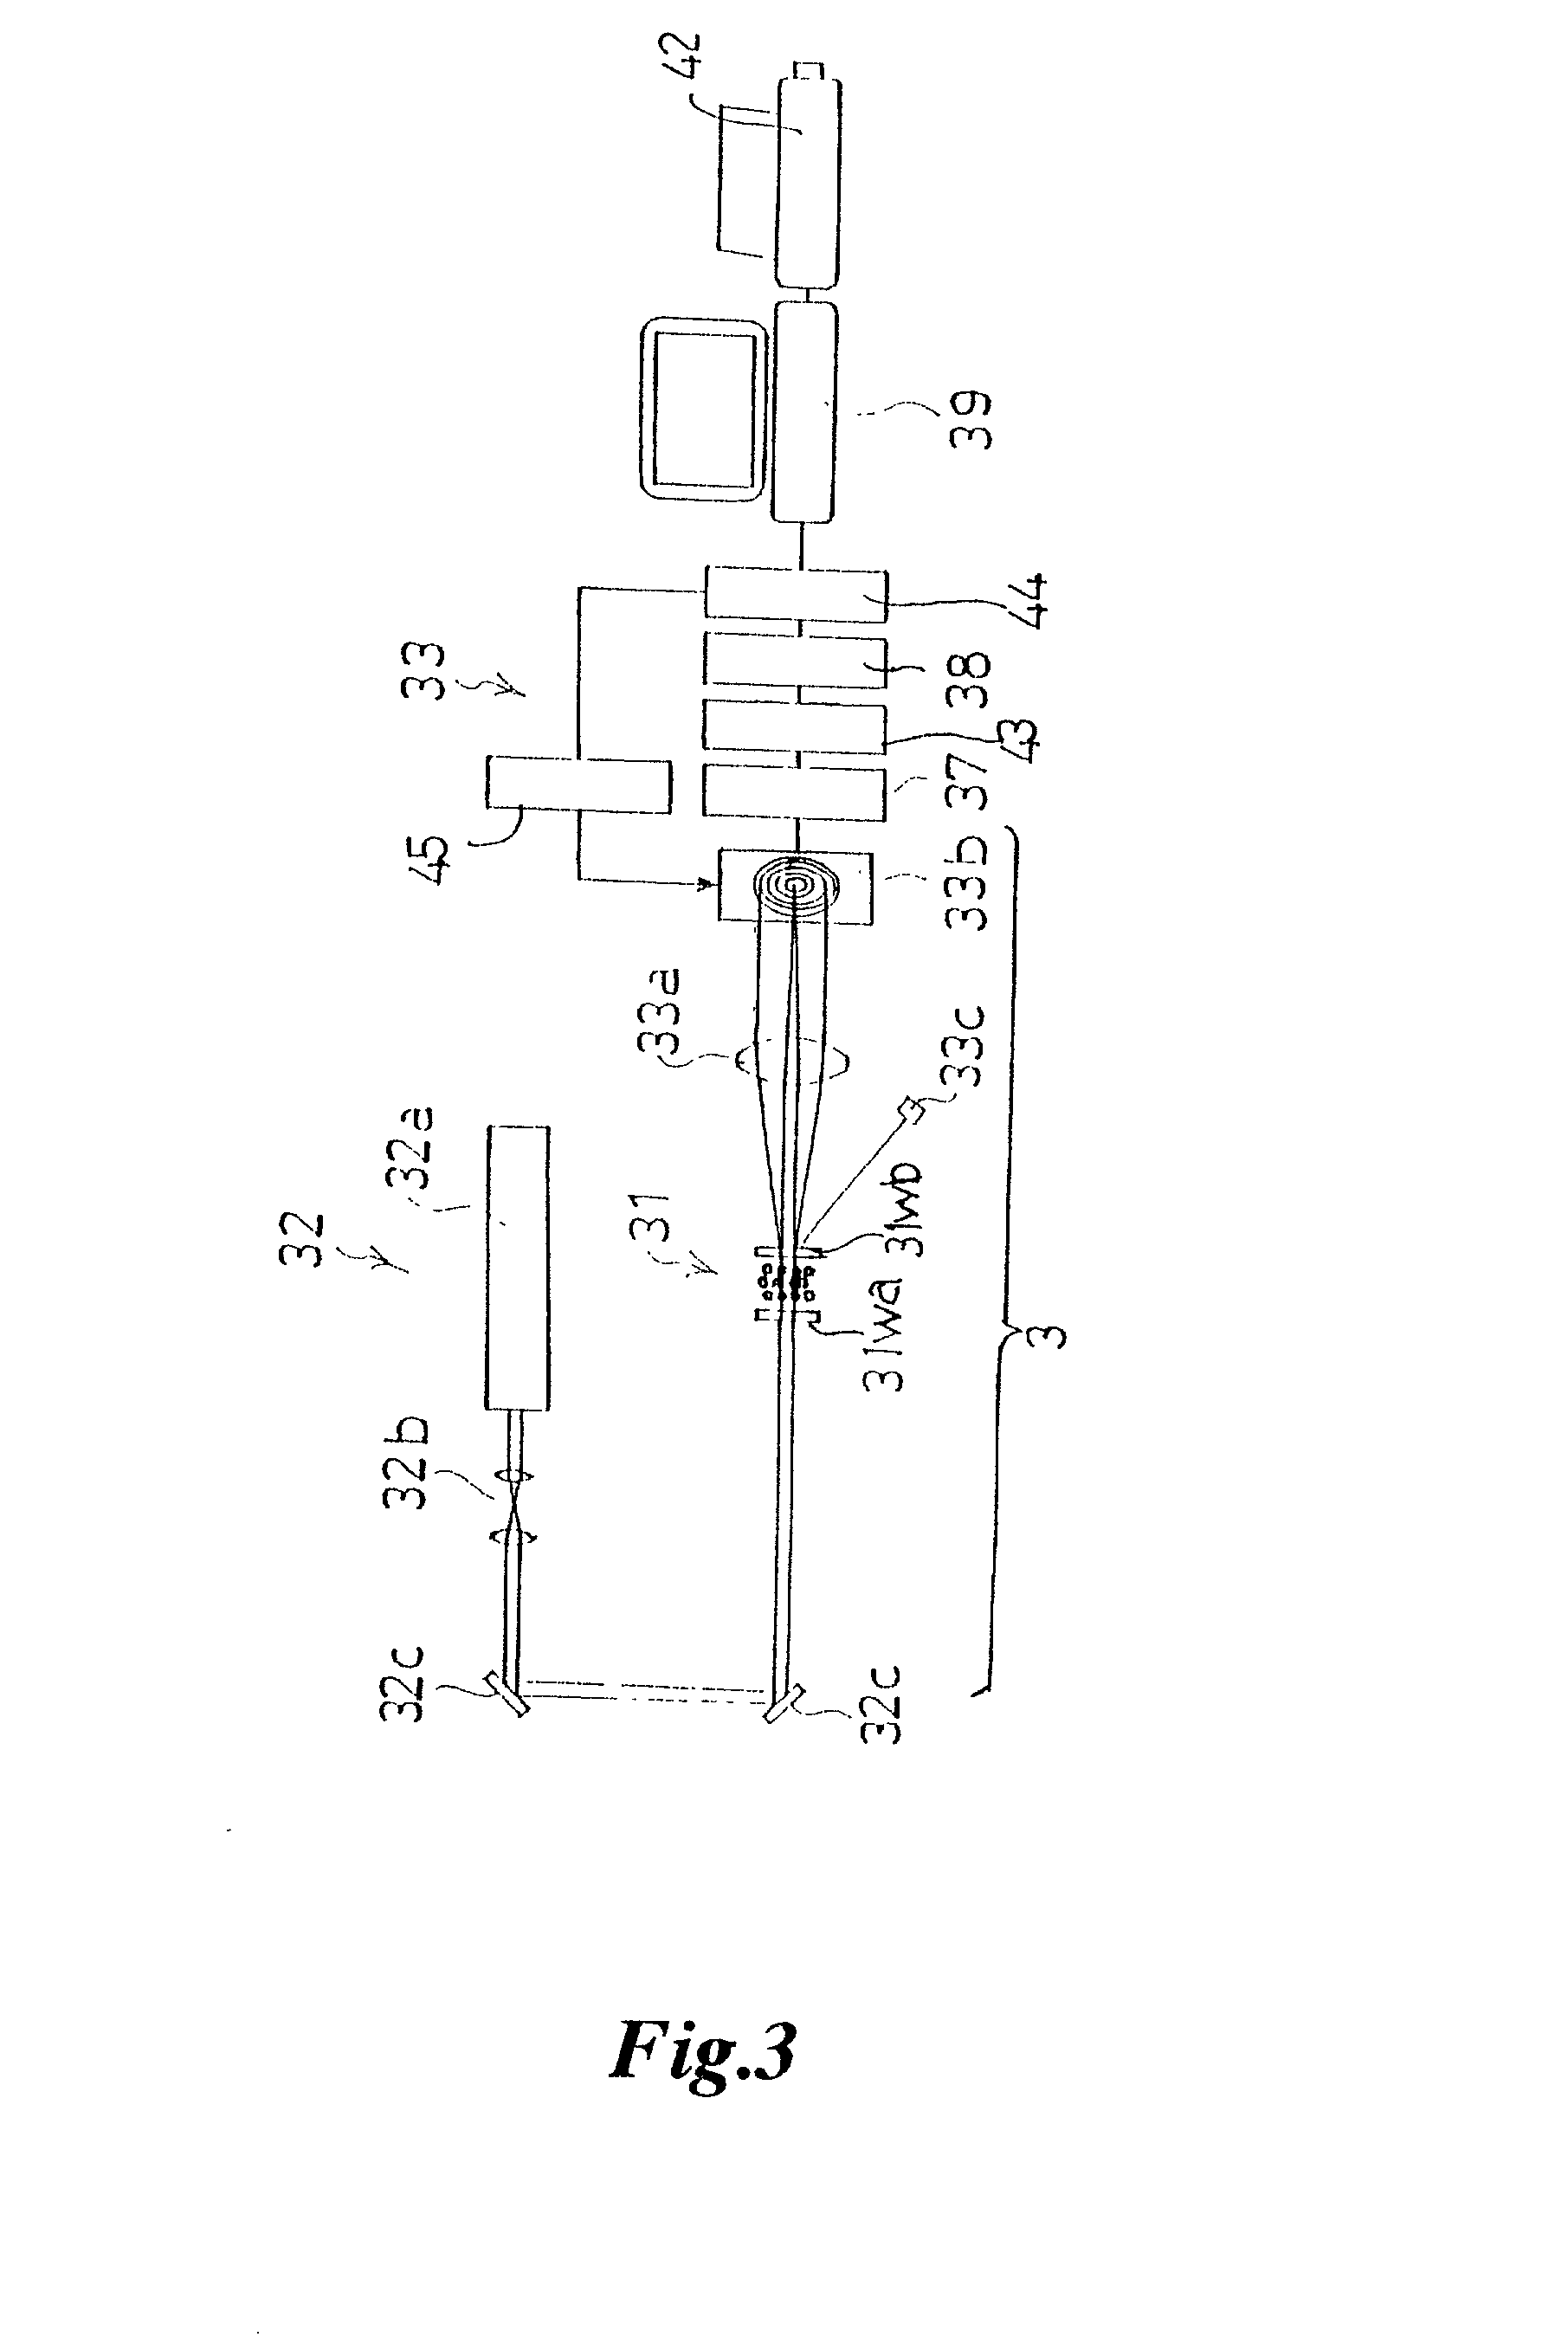 Production method for granulated materials by controlling particle size distribution using diffracted and scattered light from particles under granulation and system to execute the method